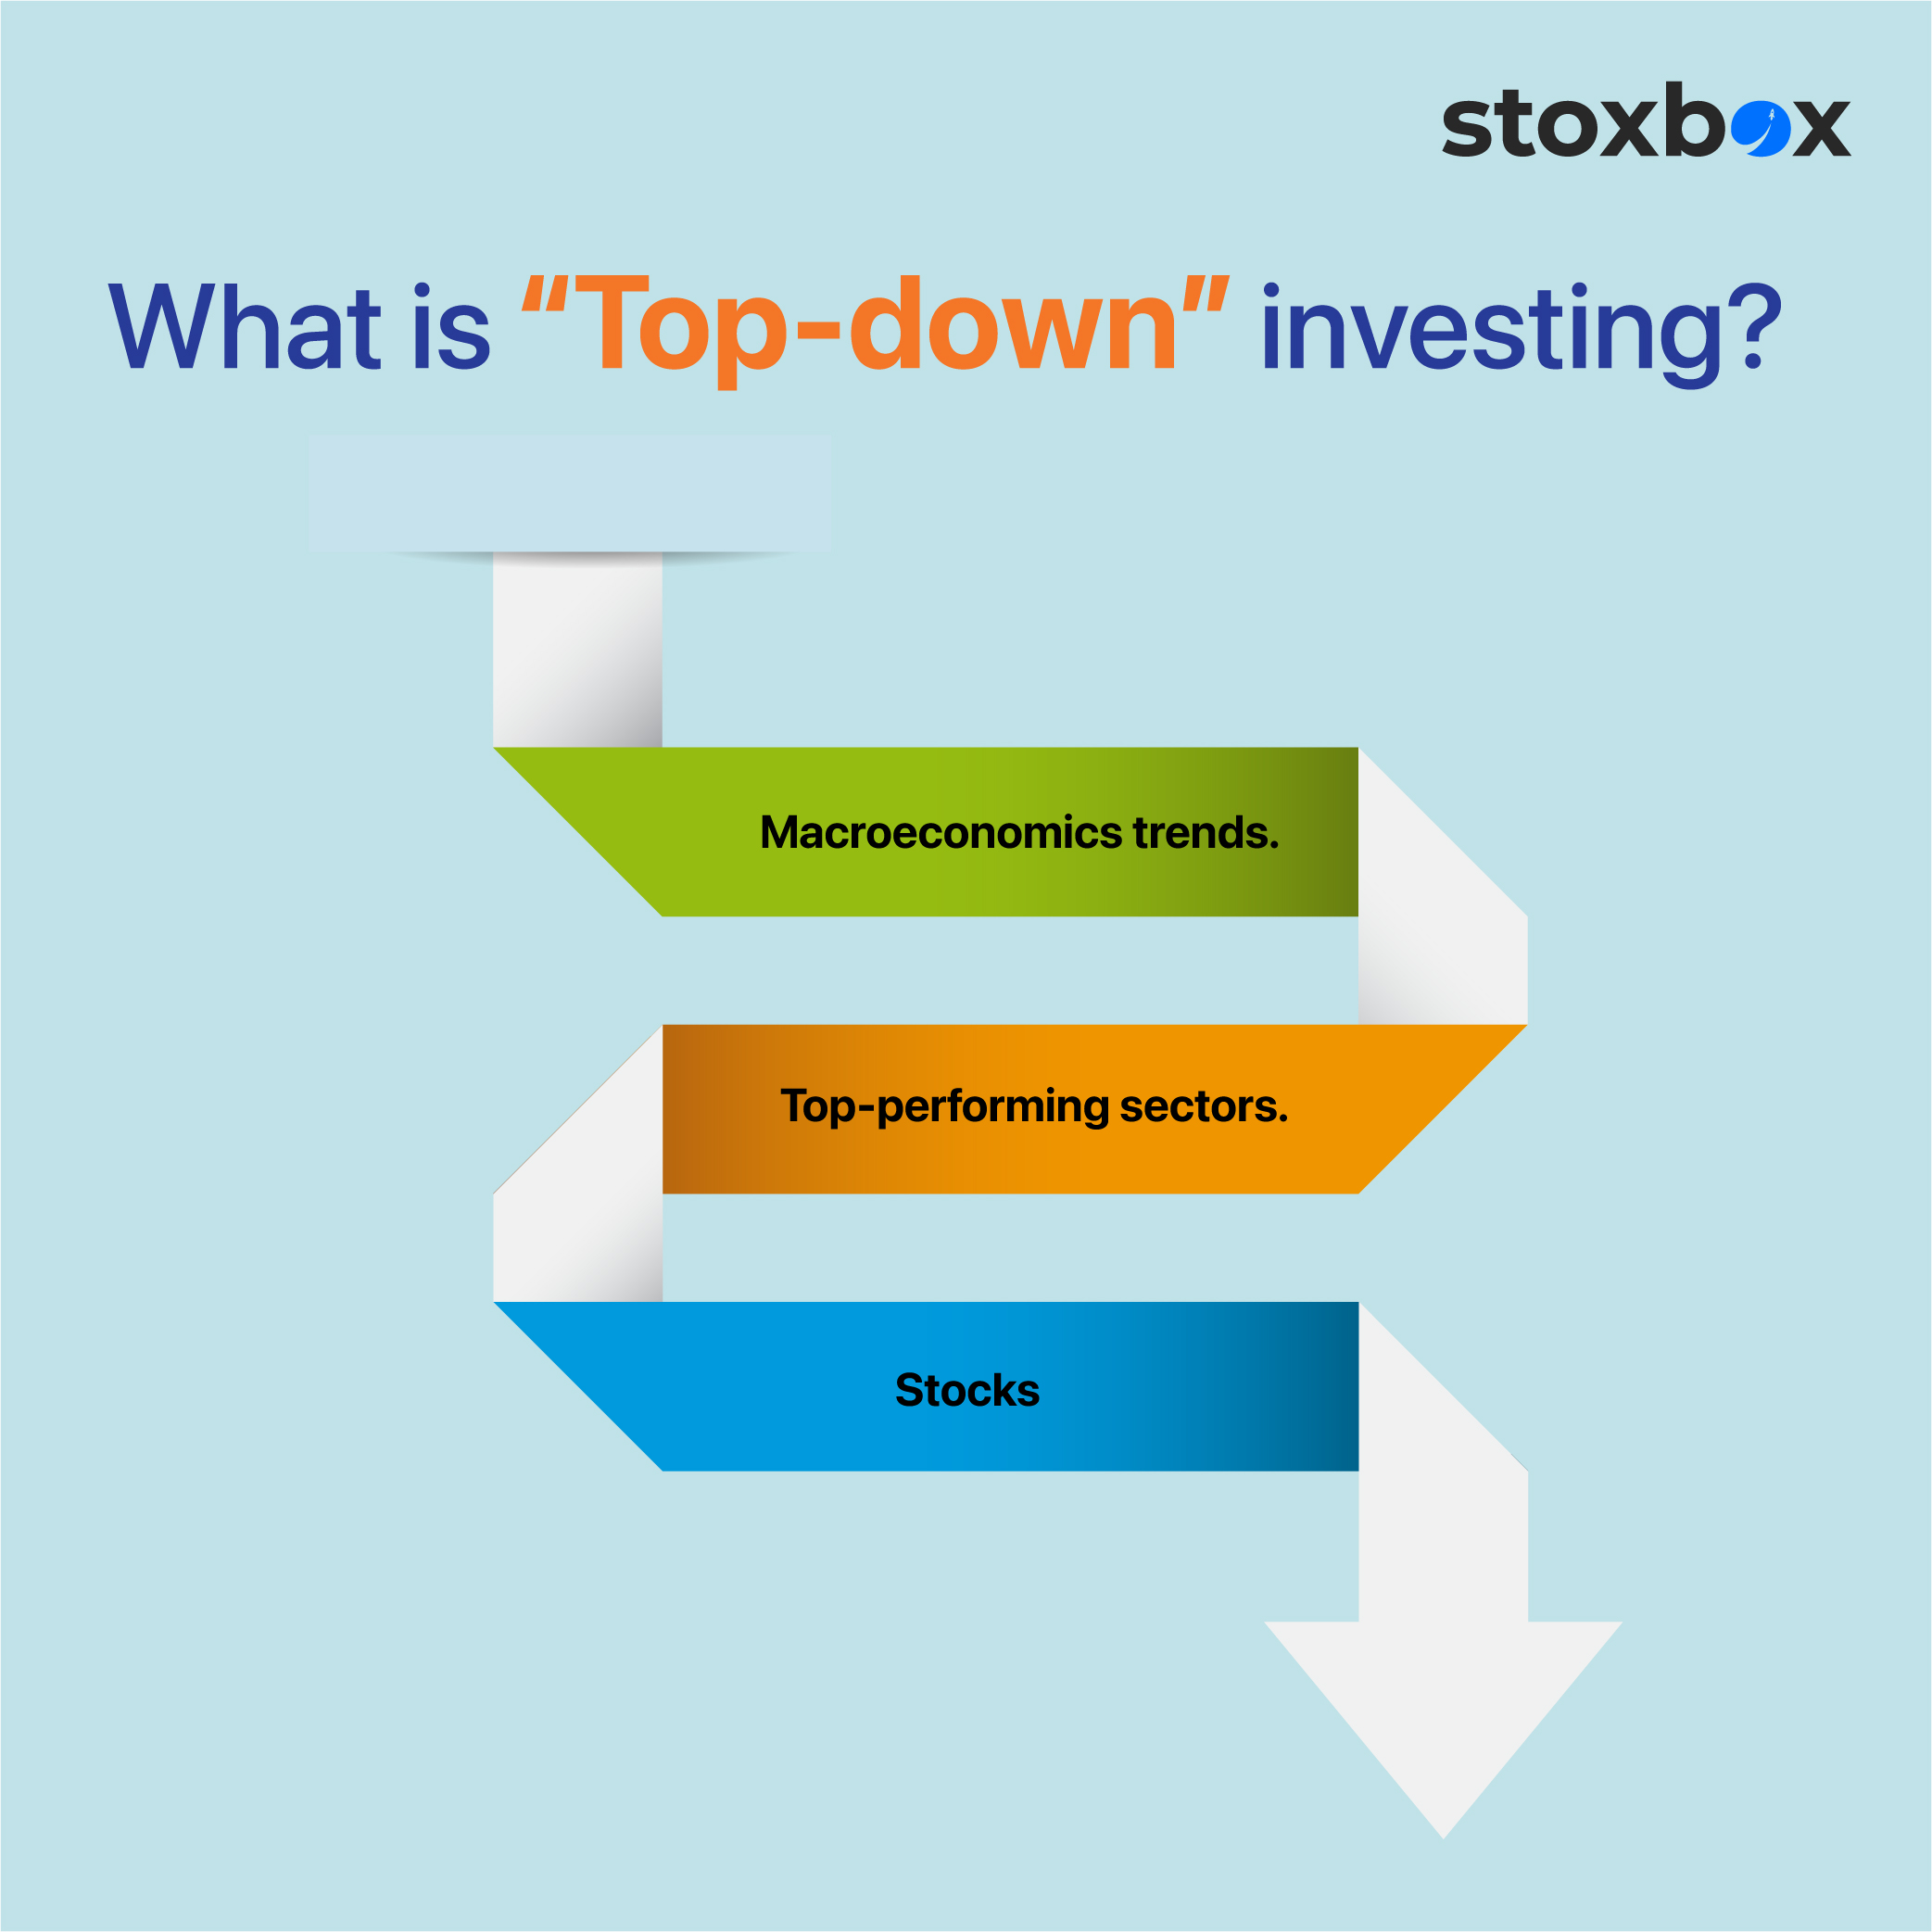 How do “top-down” and “bottom-up” investing differ